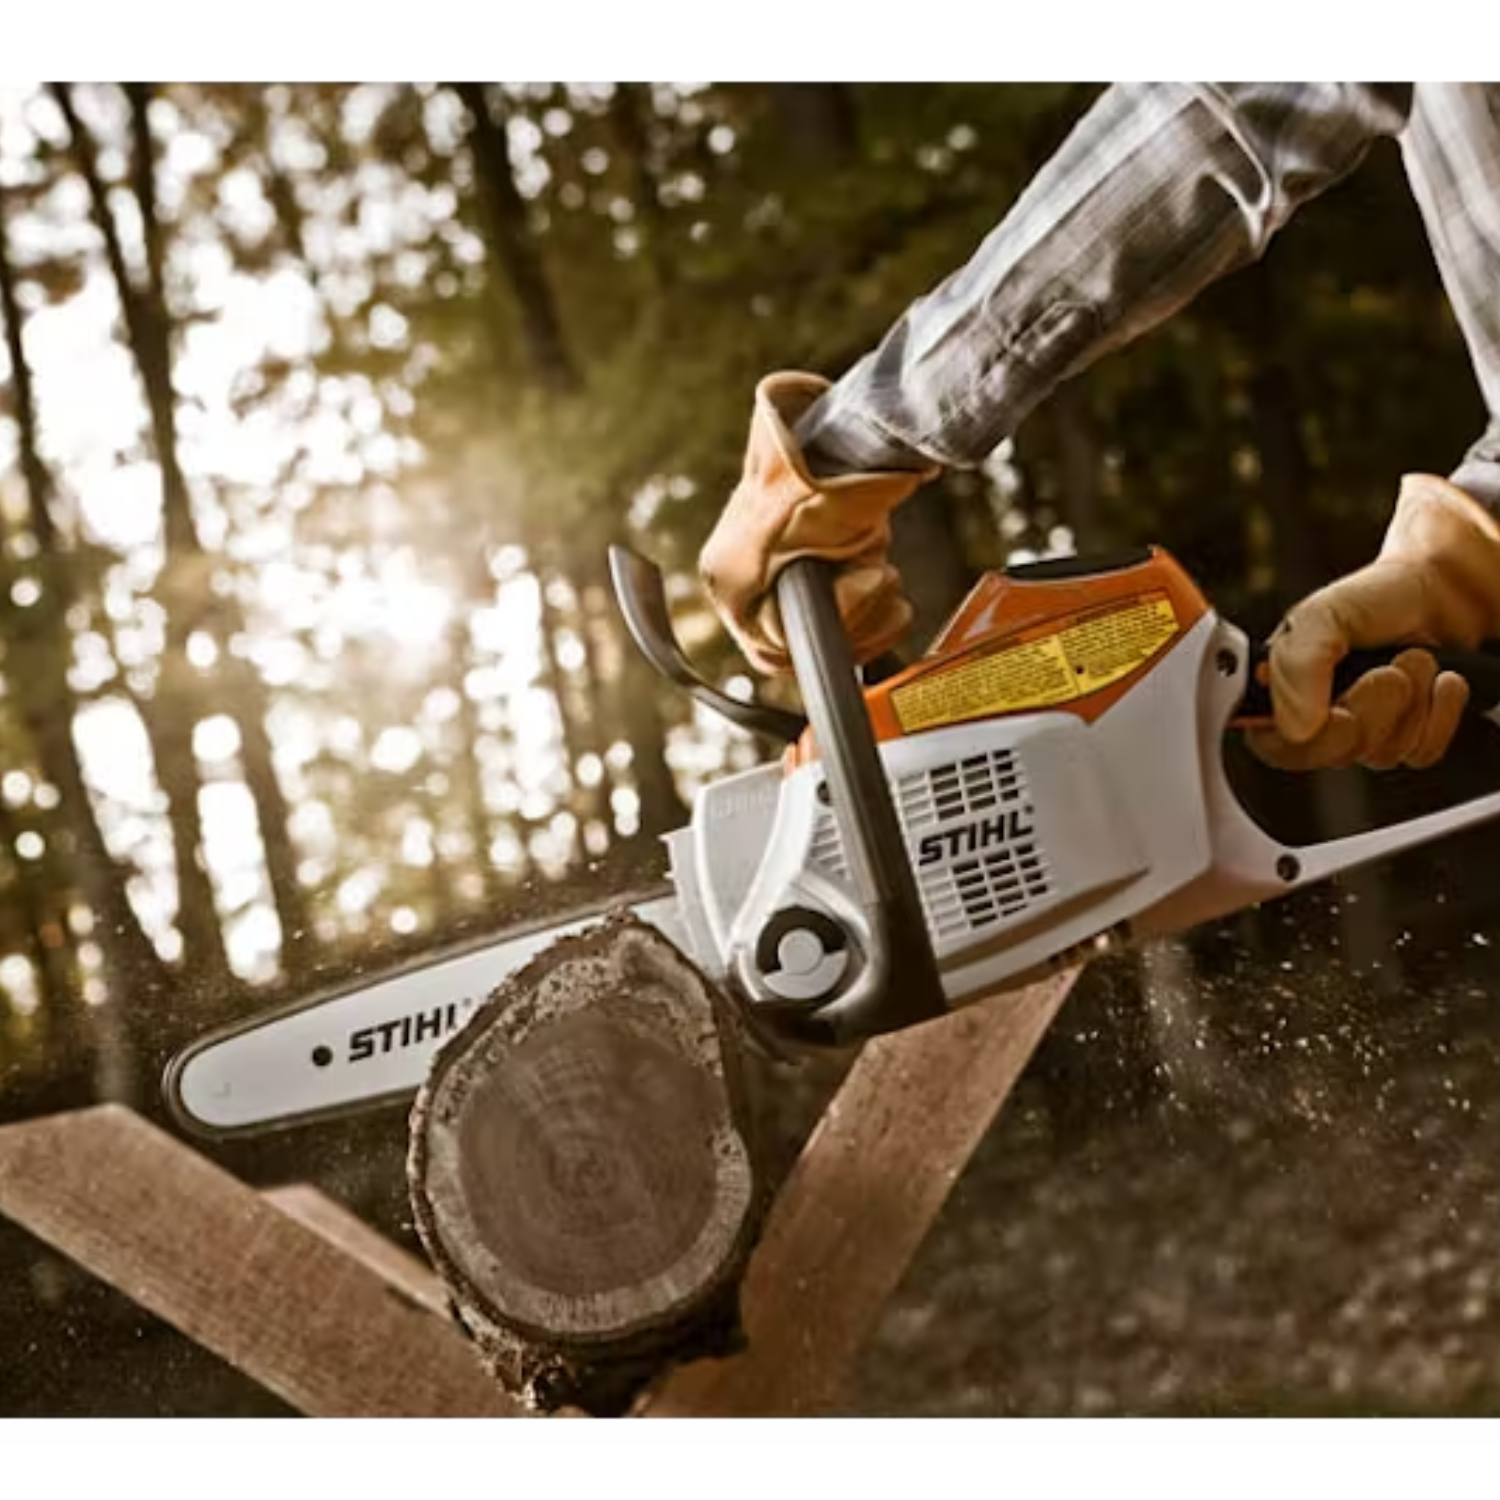 MS 231 - MS 231 petrol-driven chainsaw: compact and powerful for